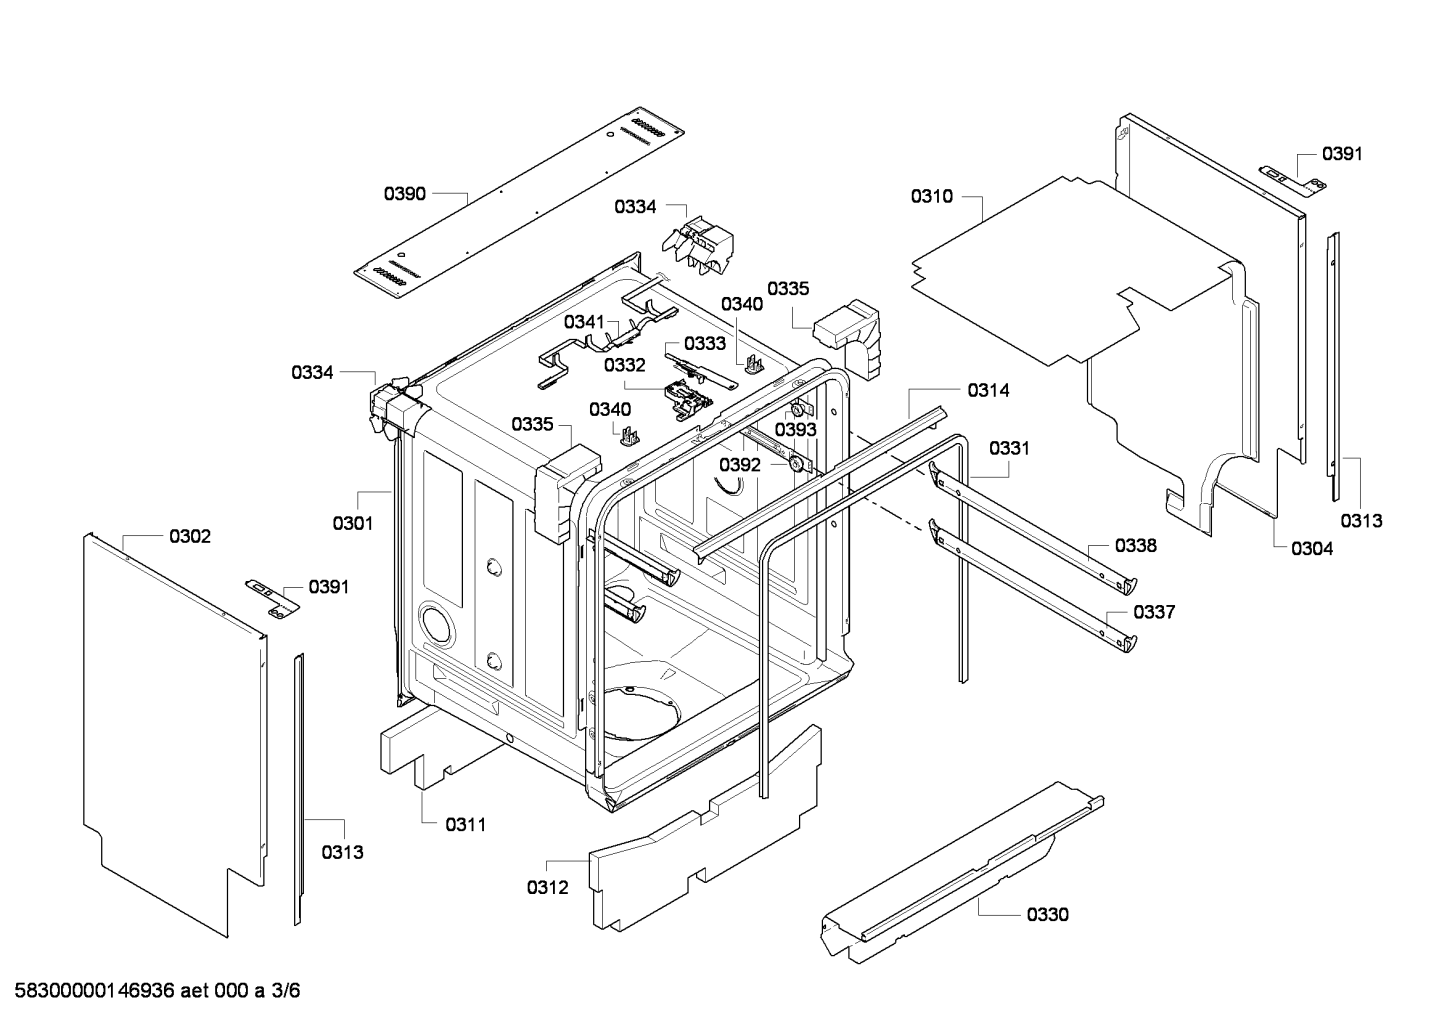 drawing_link_3_device_1566851